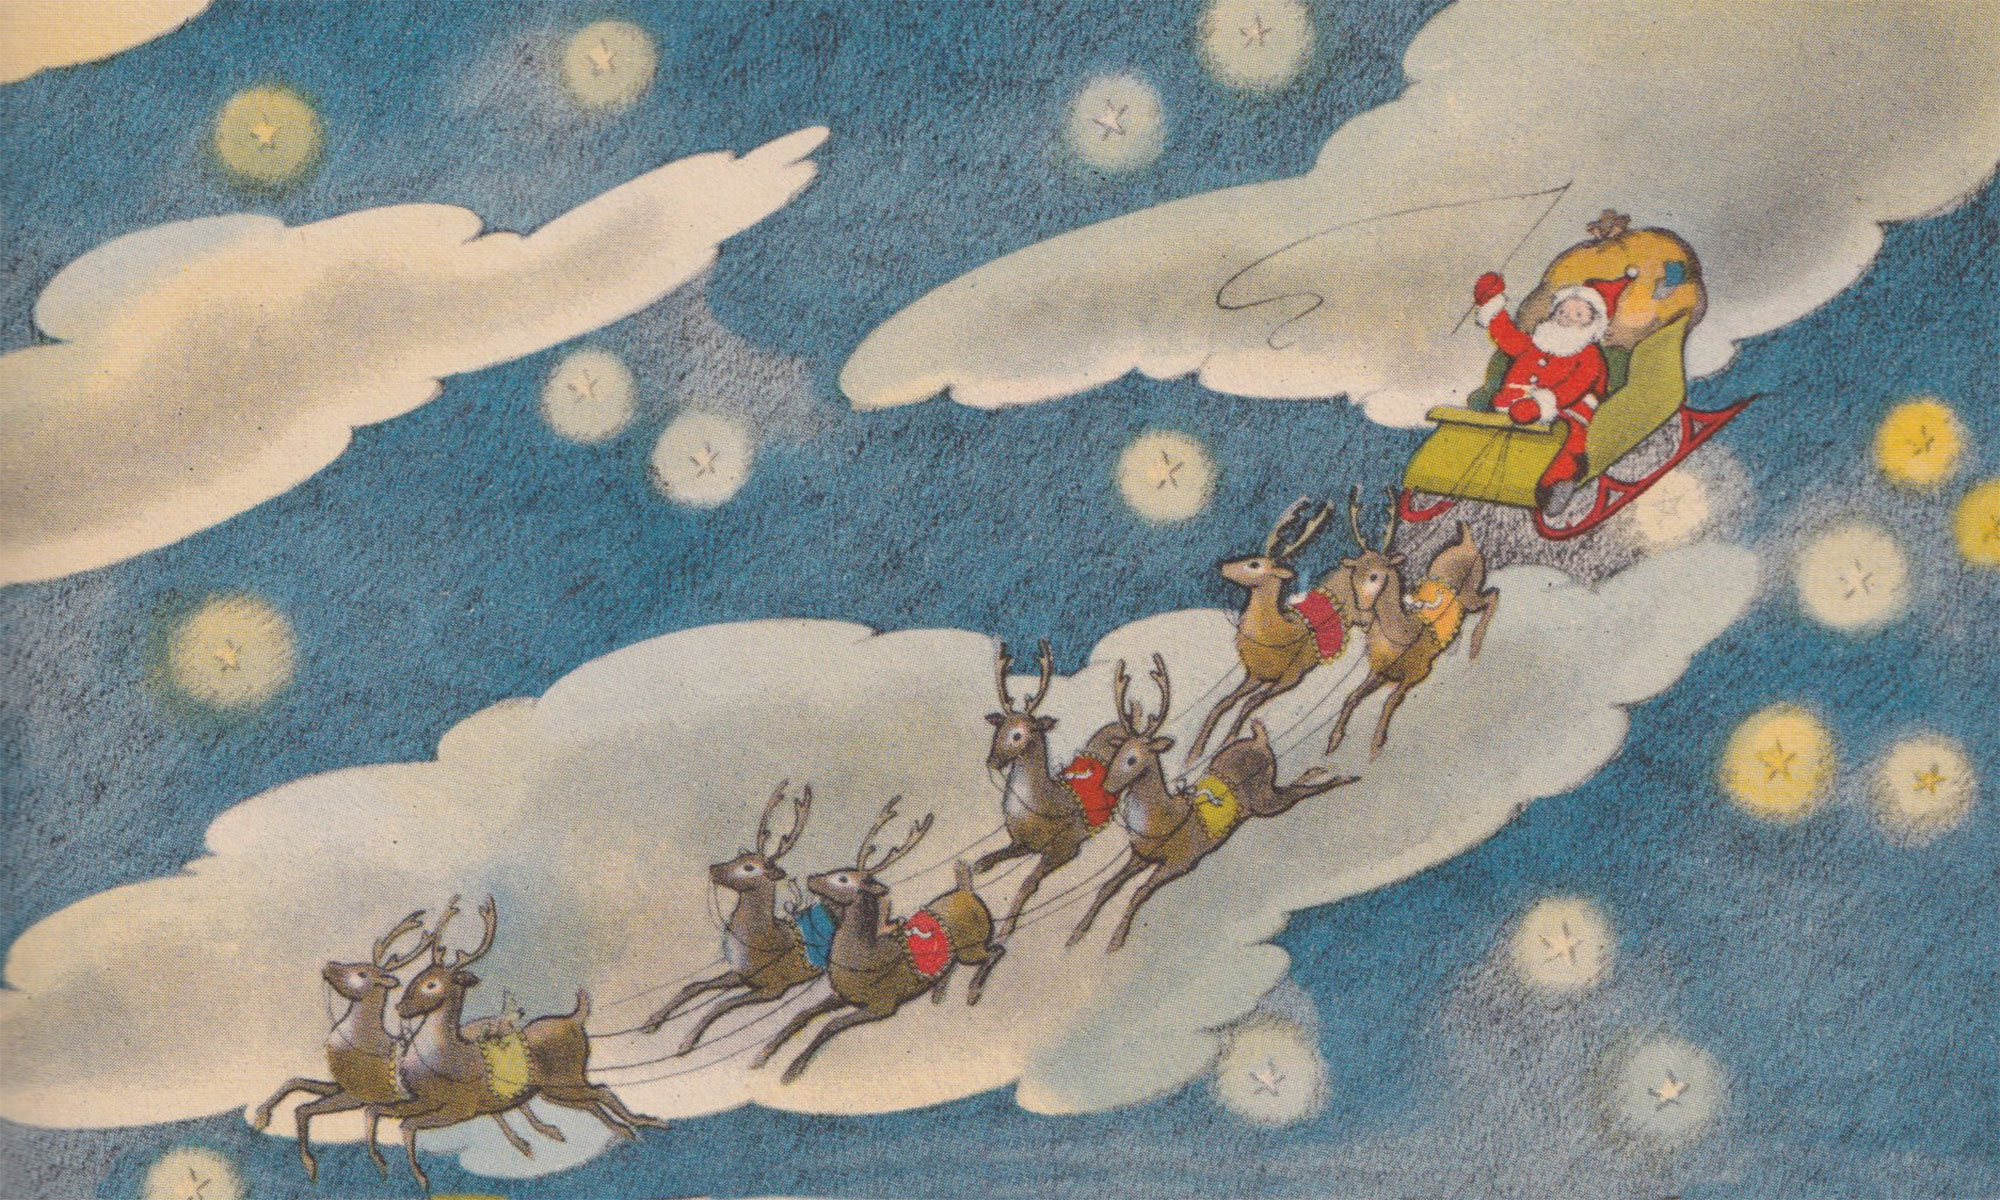 Illustration of Santa sleigh from The Night Before Christmas